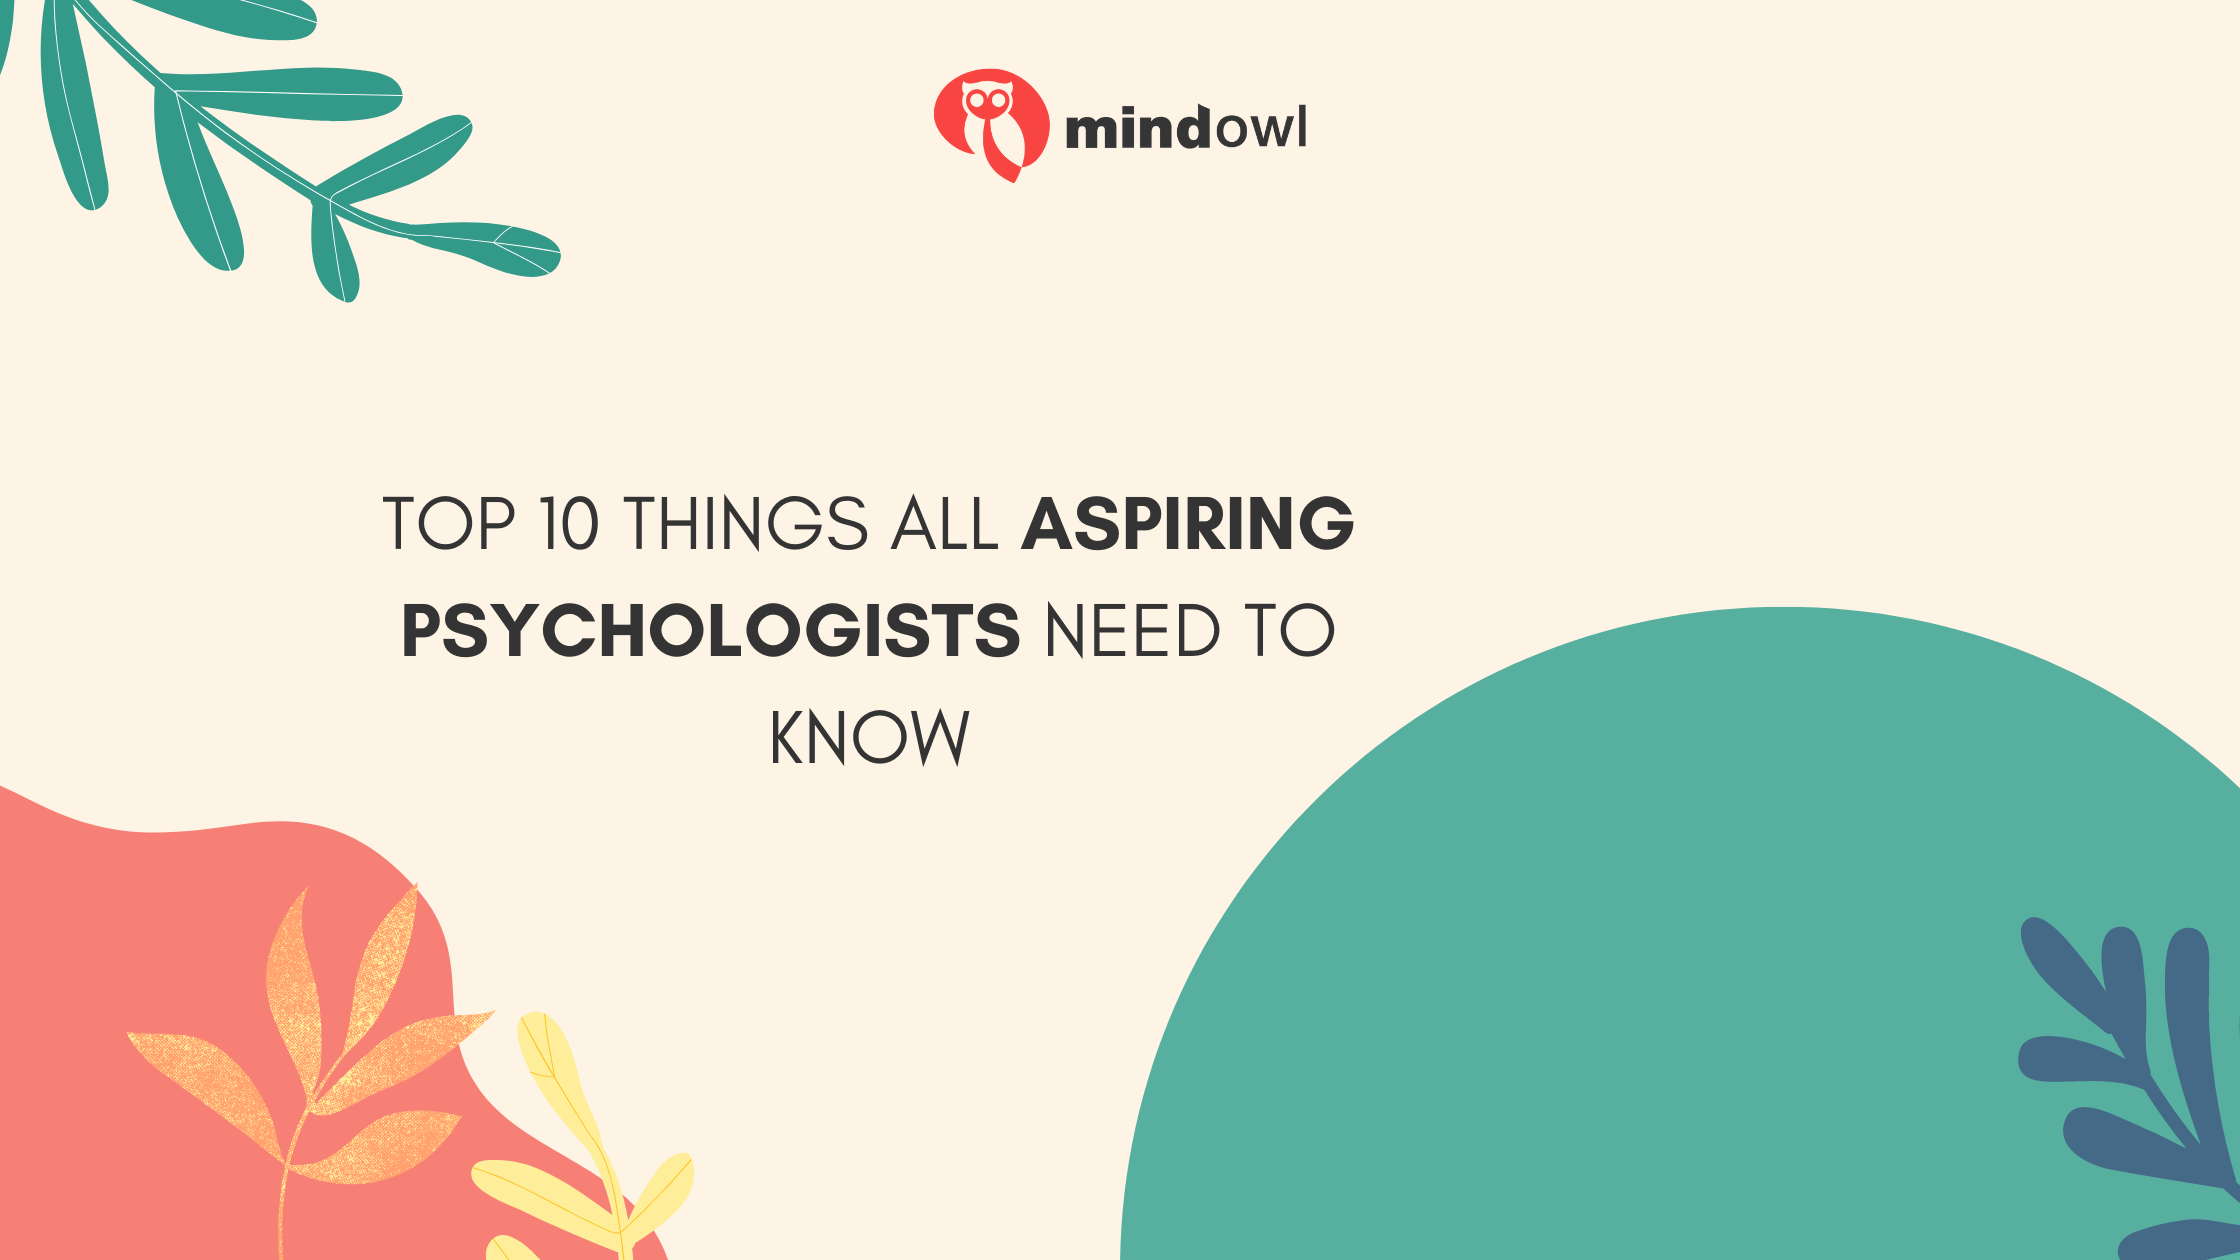 Top 10 Things All Aspiring Psychologists Need to Know